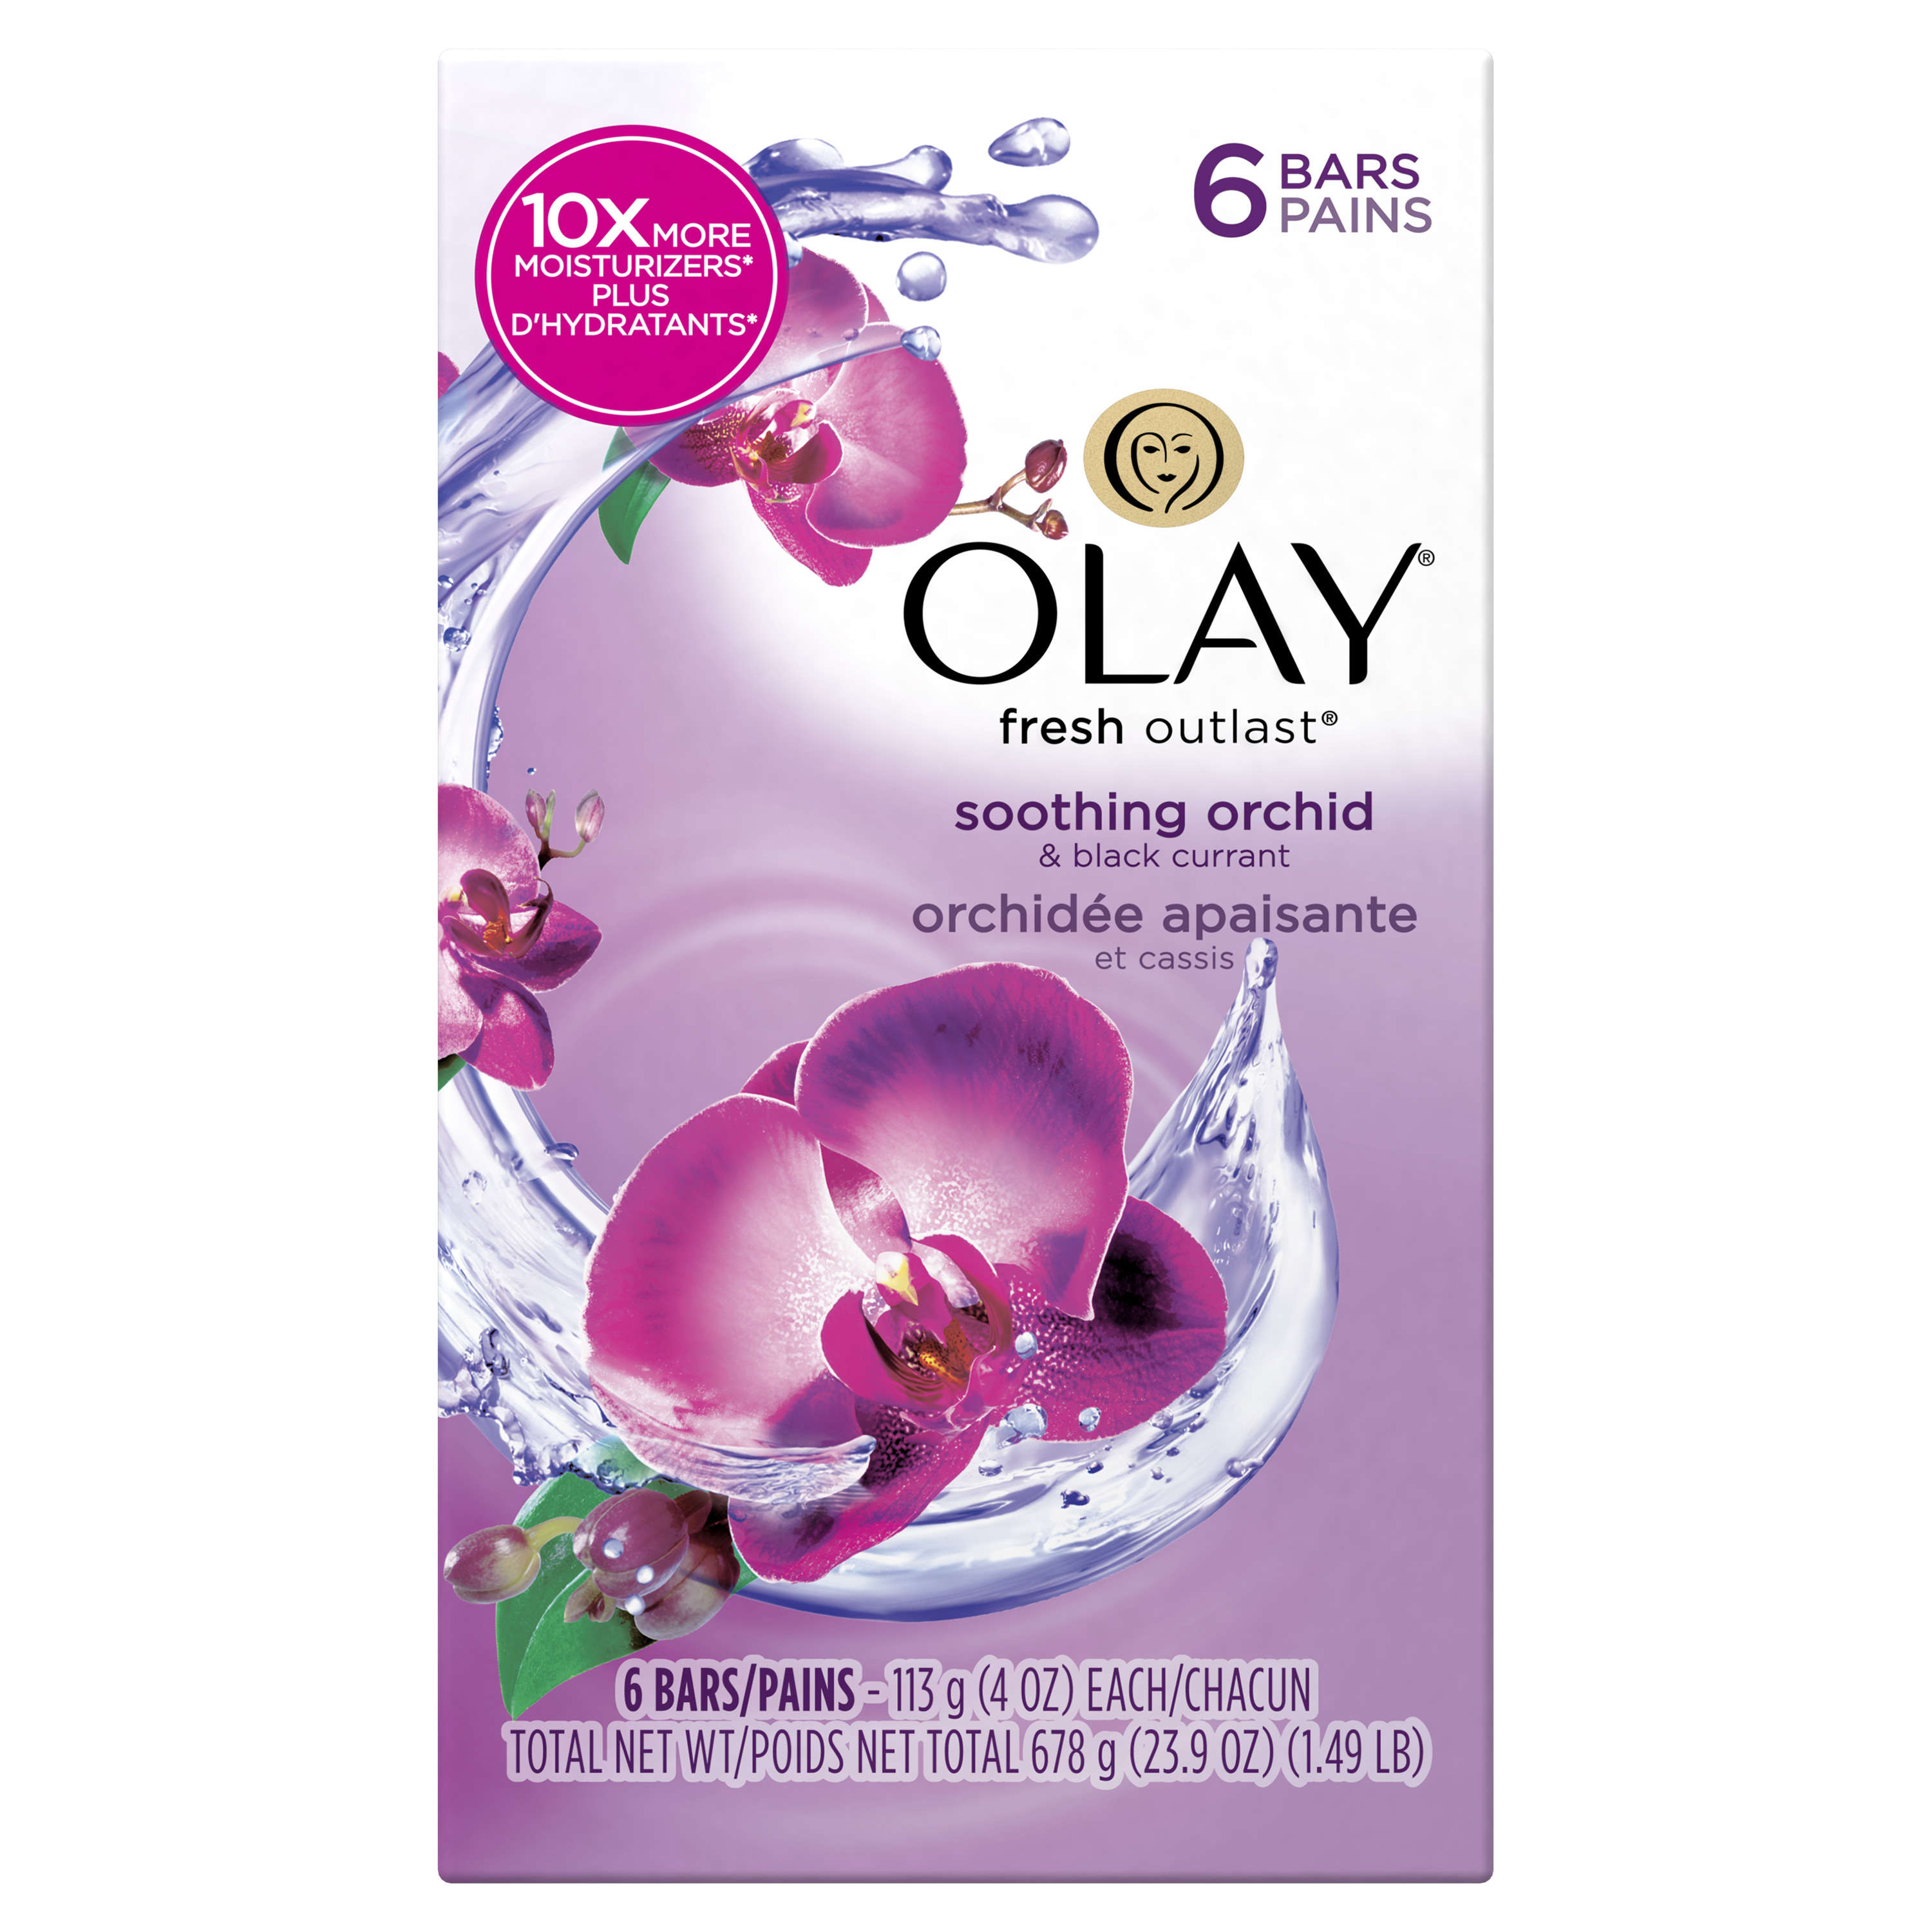 Olay Fresh Outlast Soothing Orchid & Black Currant Beauty Bar 4 oz, 6 count - image 1 of 8